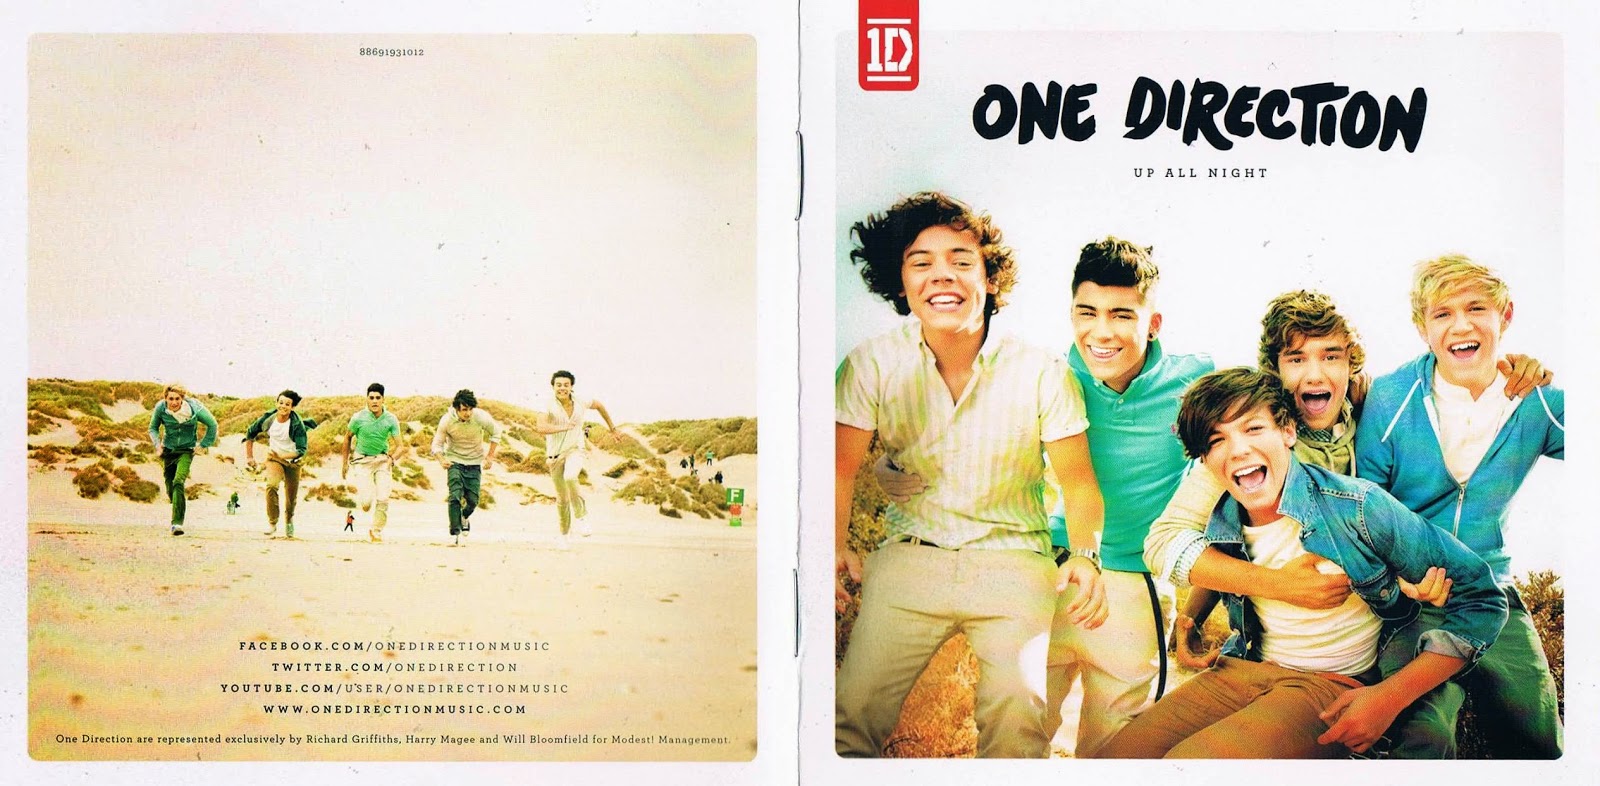 Get up all good. Up all Night one Direction альбом. One Direction альбомы. One Direction обложки альбомов. Beatles one Direction.